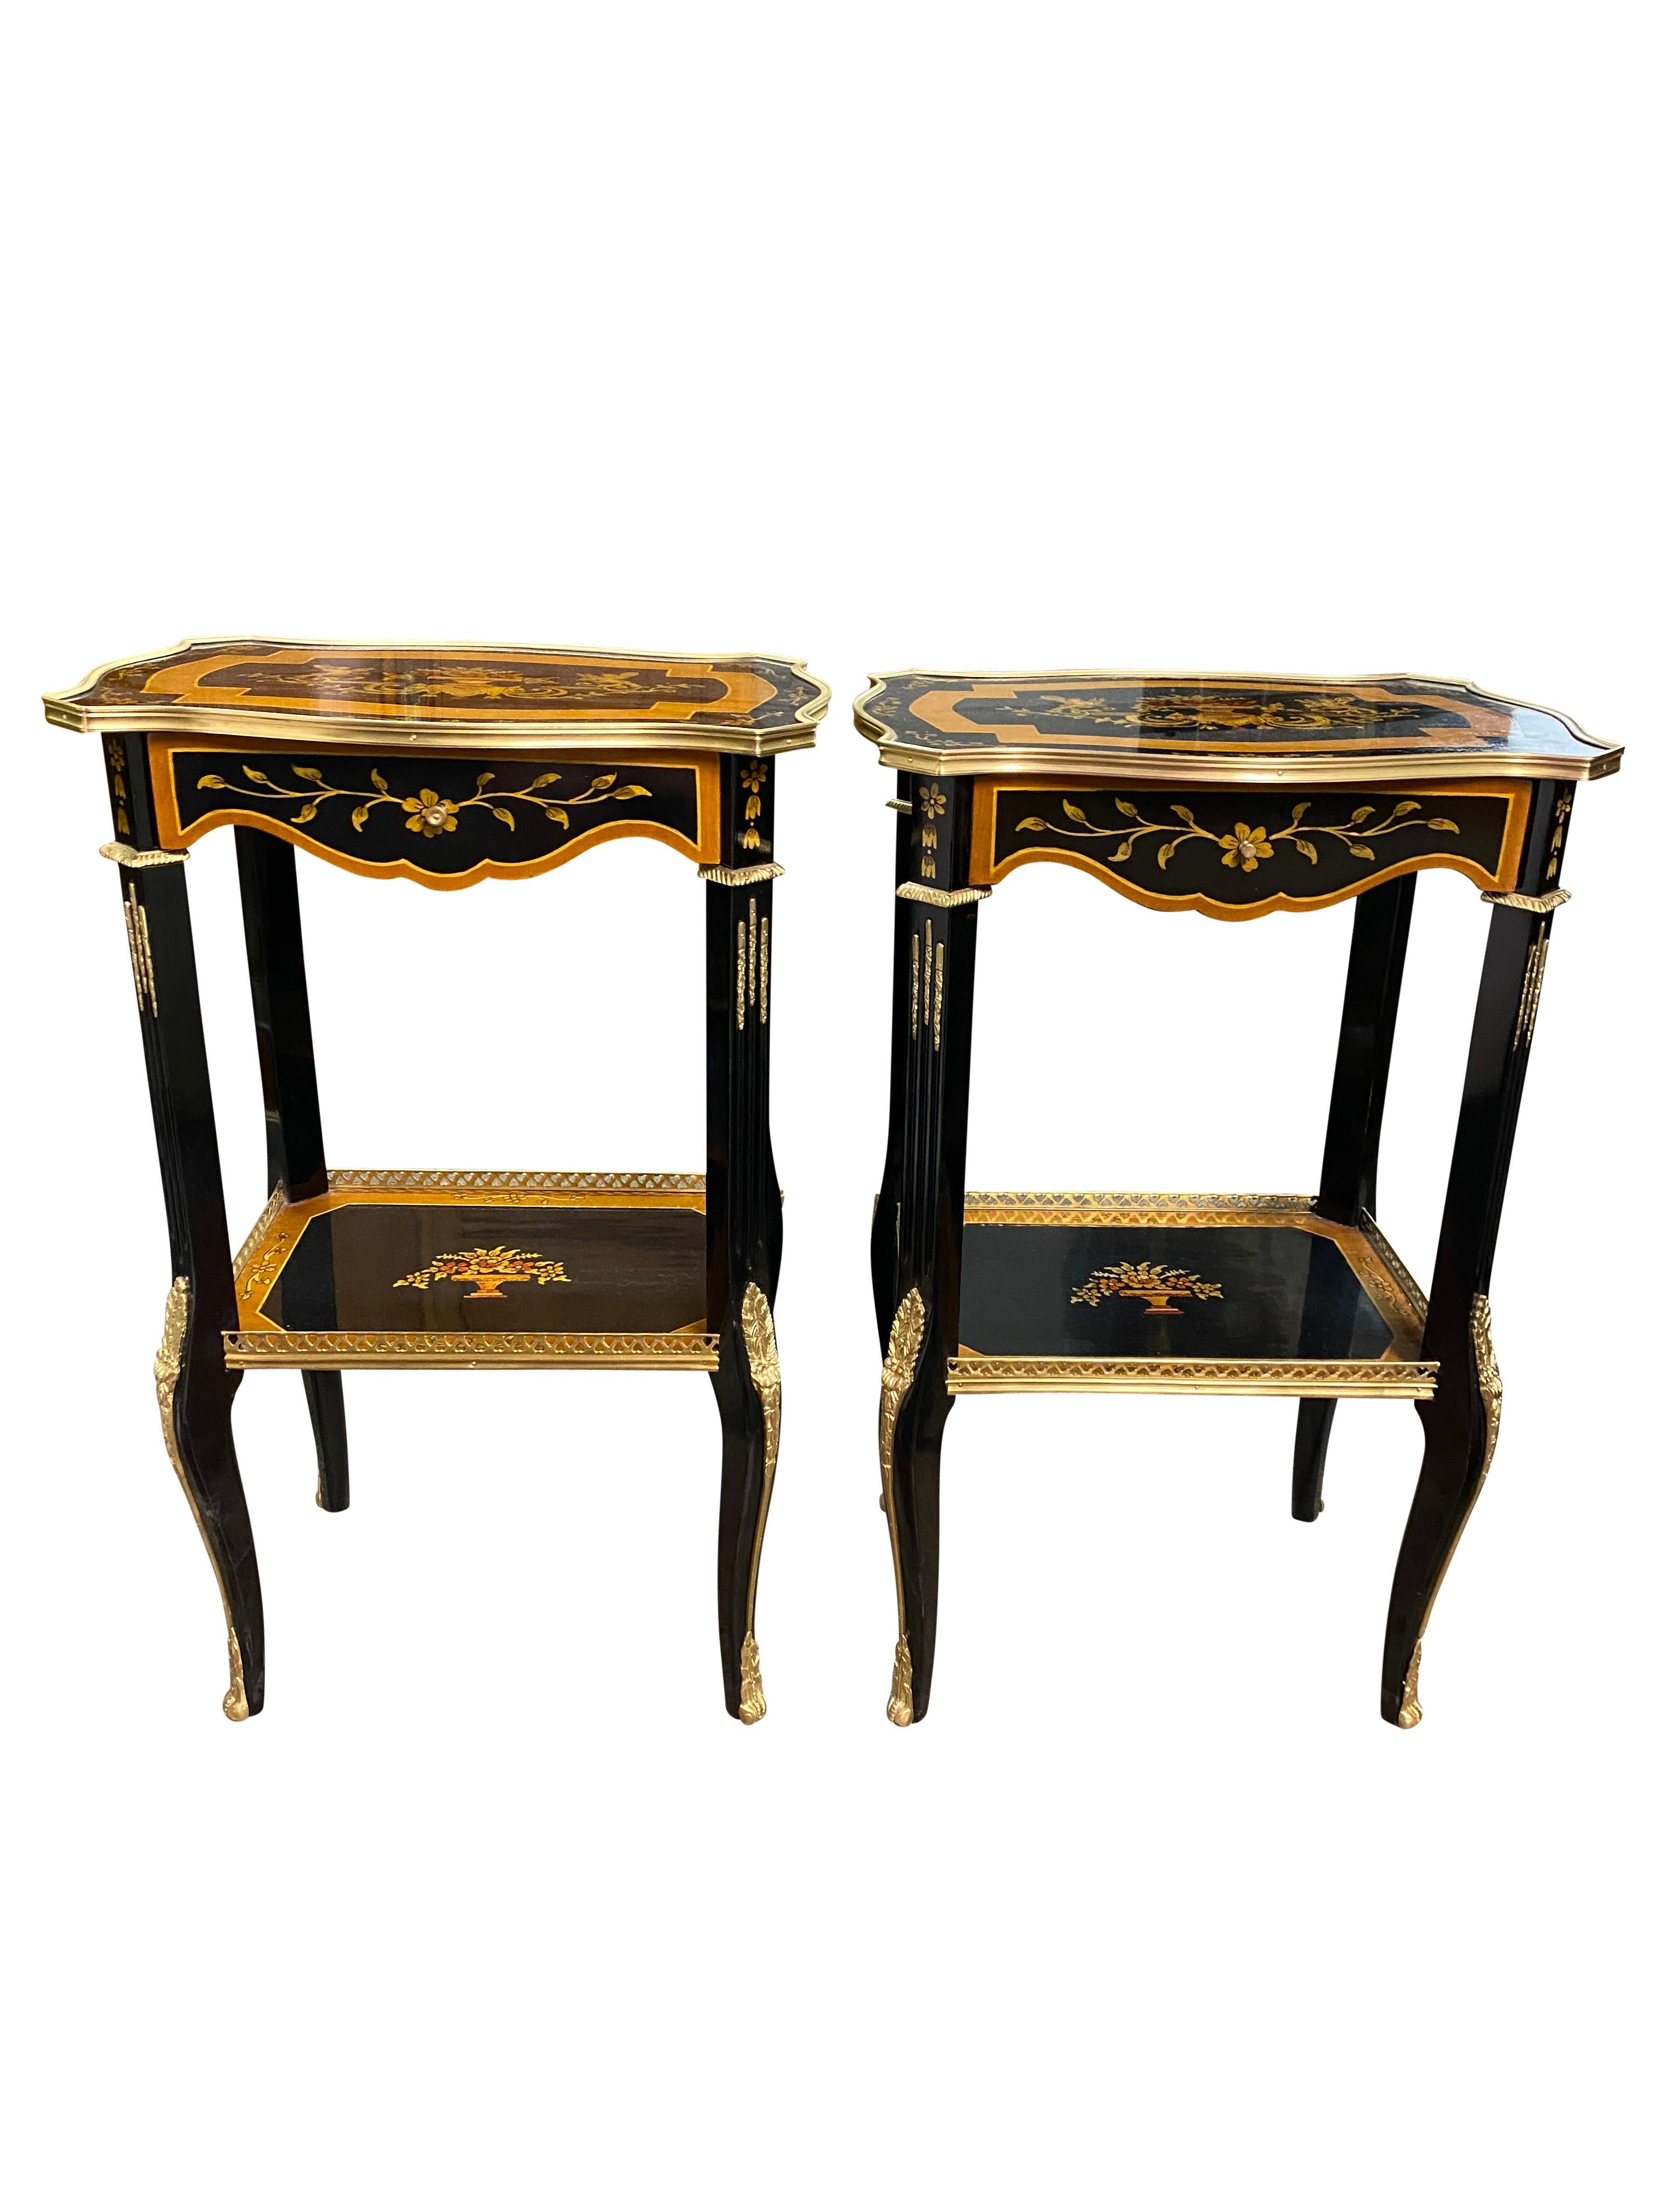 A stunning pair of 20th century French Lacquer style side tables. A gorgeous and elegant design perfect for modern interiors.